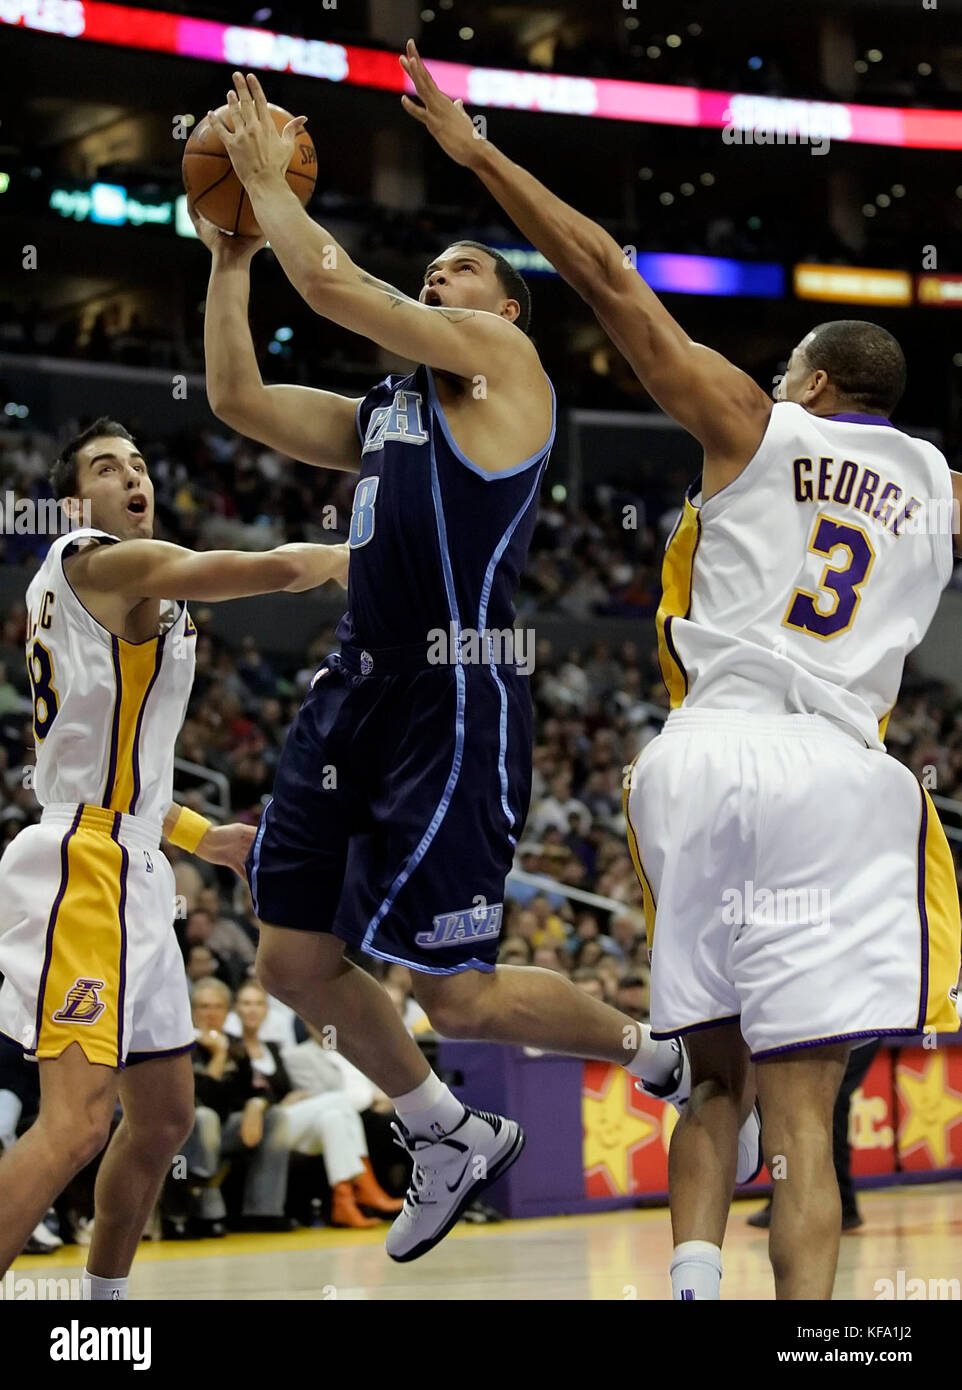 Utah Jazz's Deron Williams, center, shoots over the outstretched arms of Los Angeles Lakers' Devean George, right, and Sasha Vujacic of Slovenia, left,  in the first half in Los Angeles on Sunday, Jan. 1, 2006. Photo by Francis Specker Stock Photo